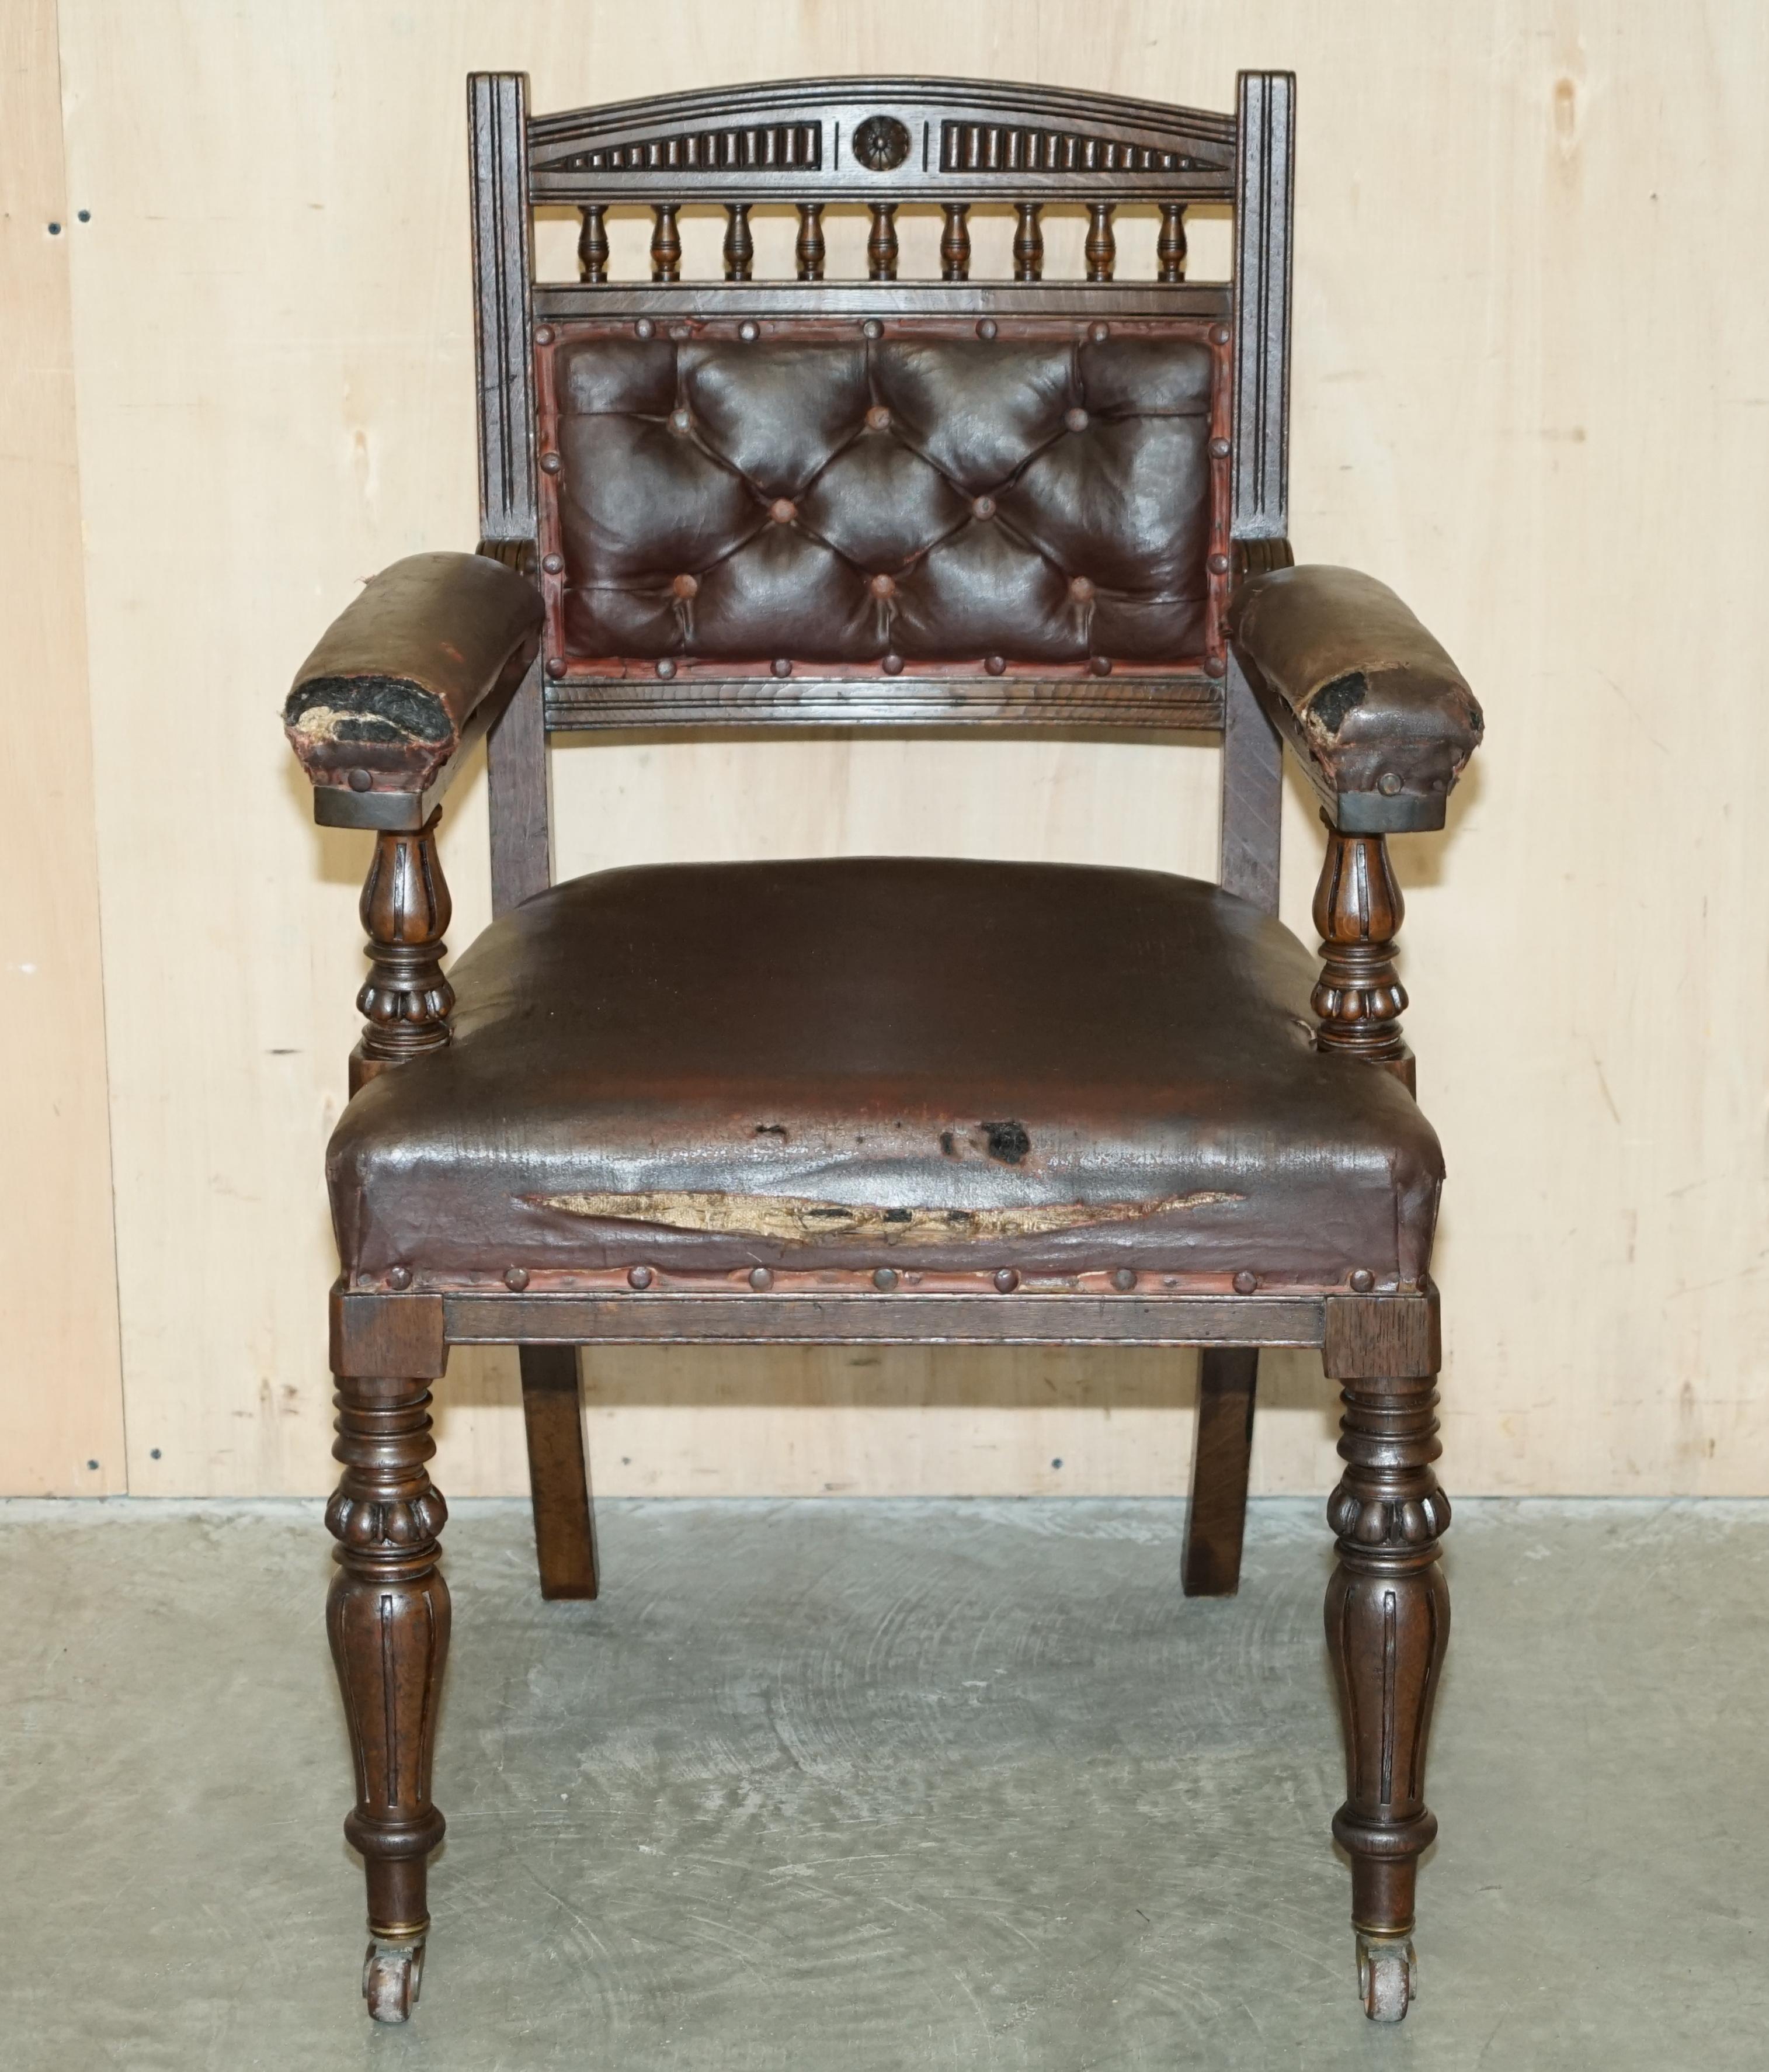 Aesthetic Movement ANTiQUE VICTORIAN AESTHETIC MOVEMENT STYLE LEATHER ARMCHAIR FOR RESTORATION For Sale